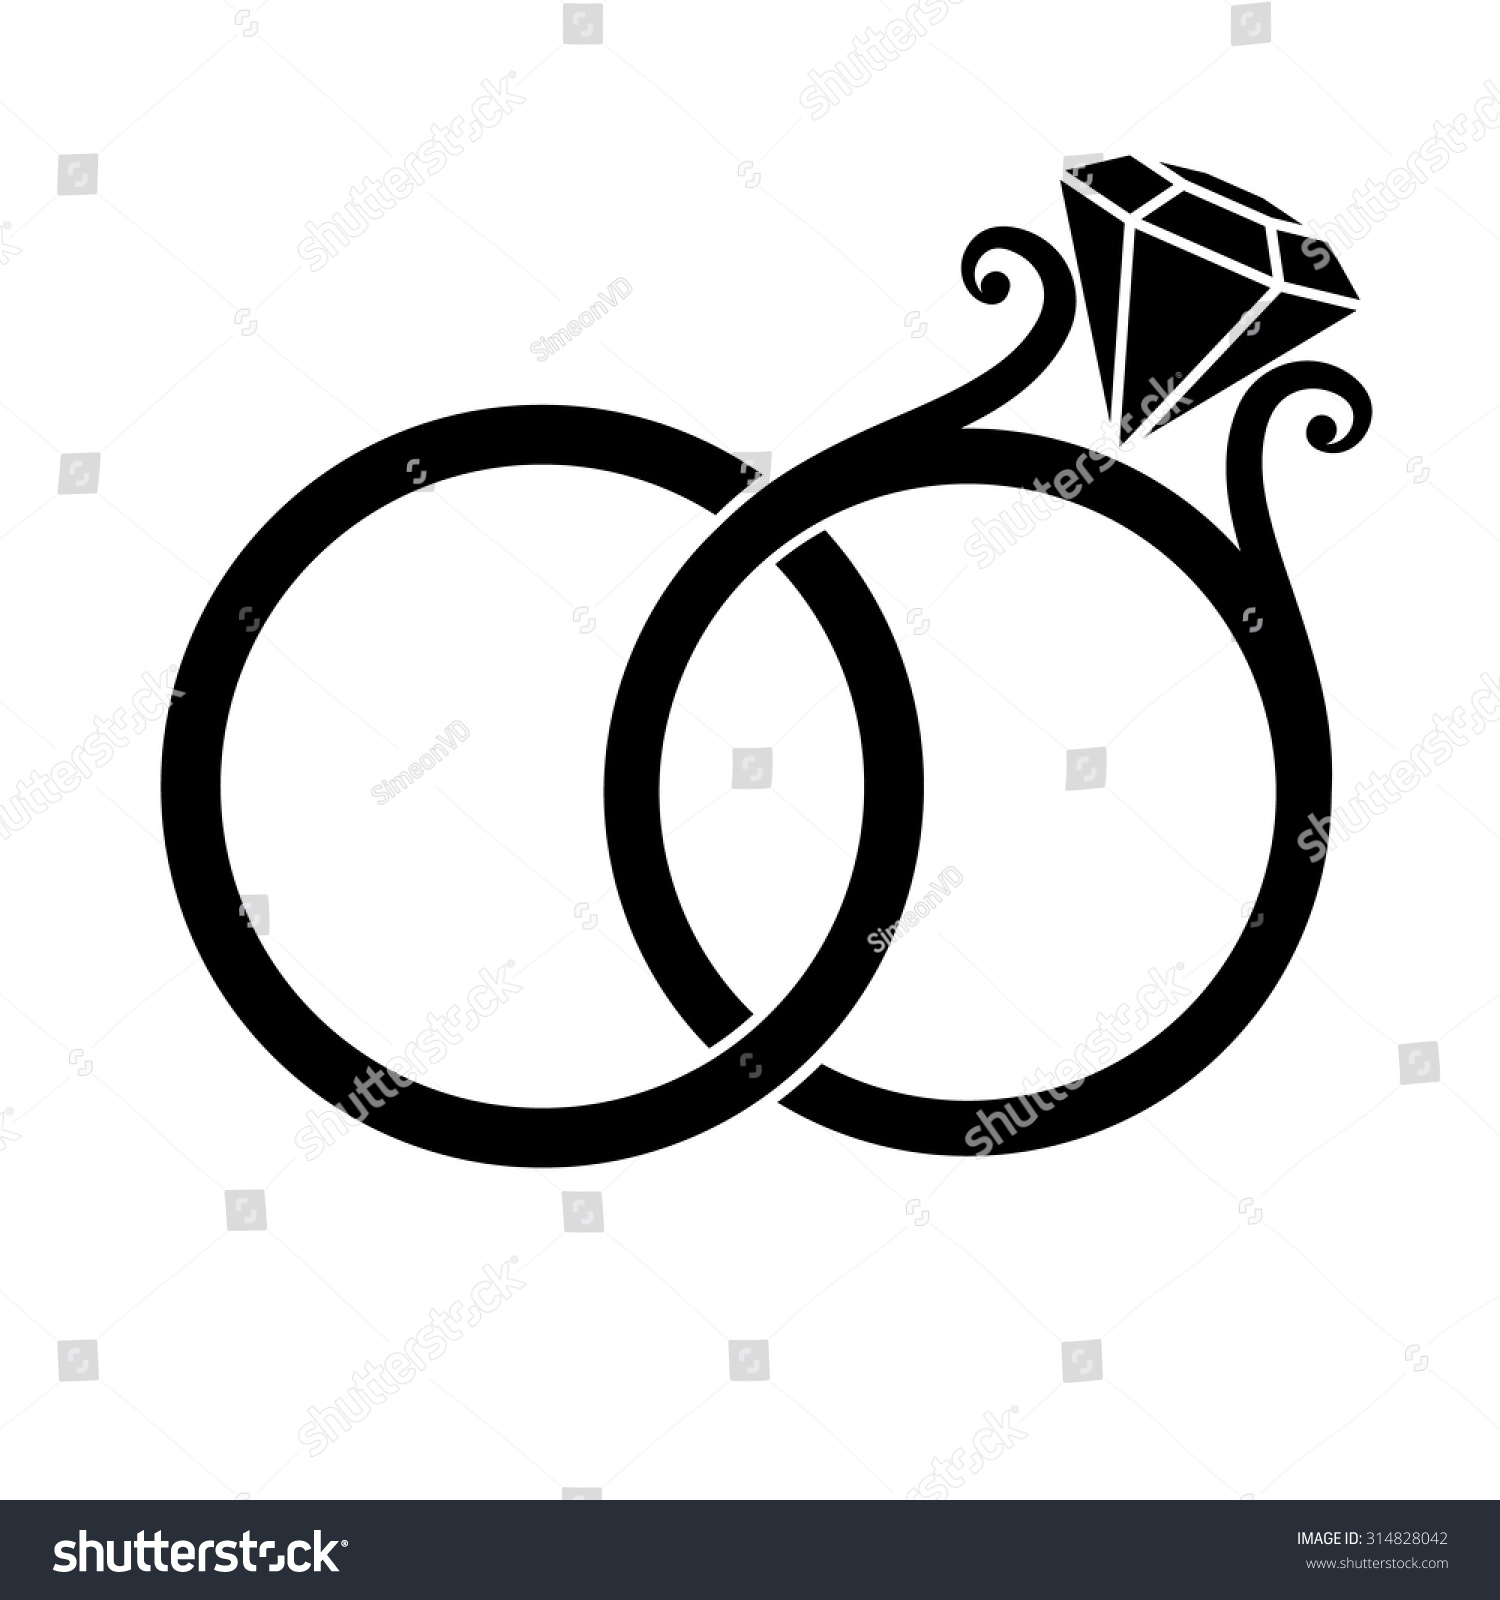 wedding ring clipart black and white - photo #11